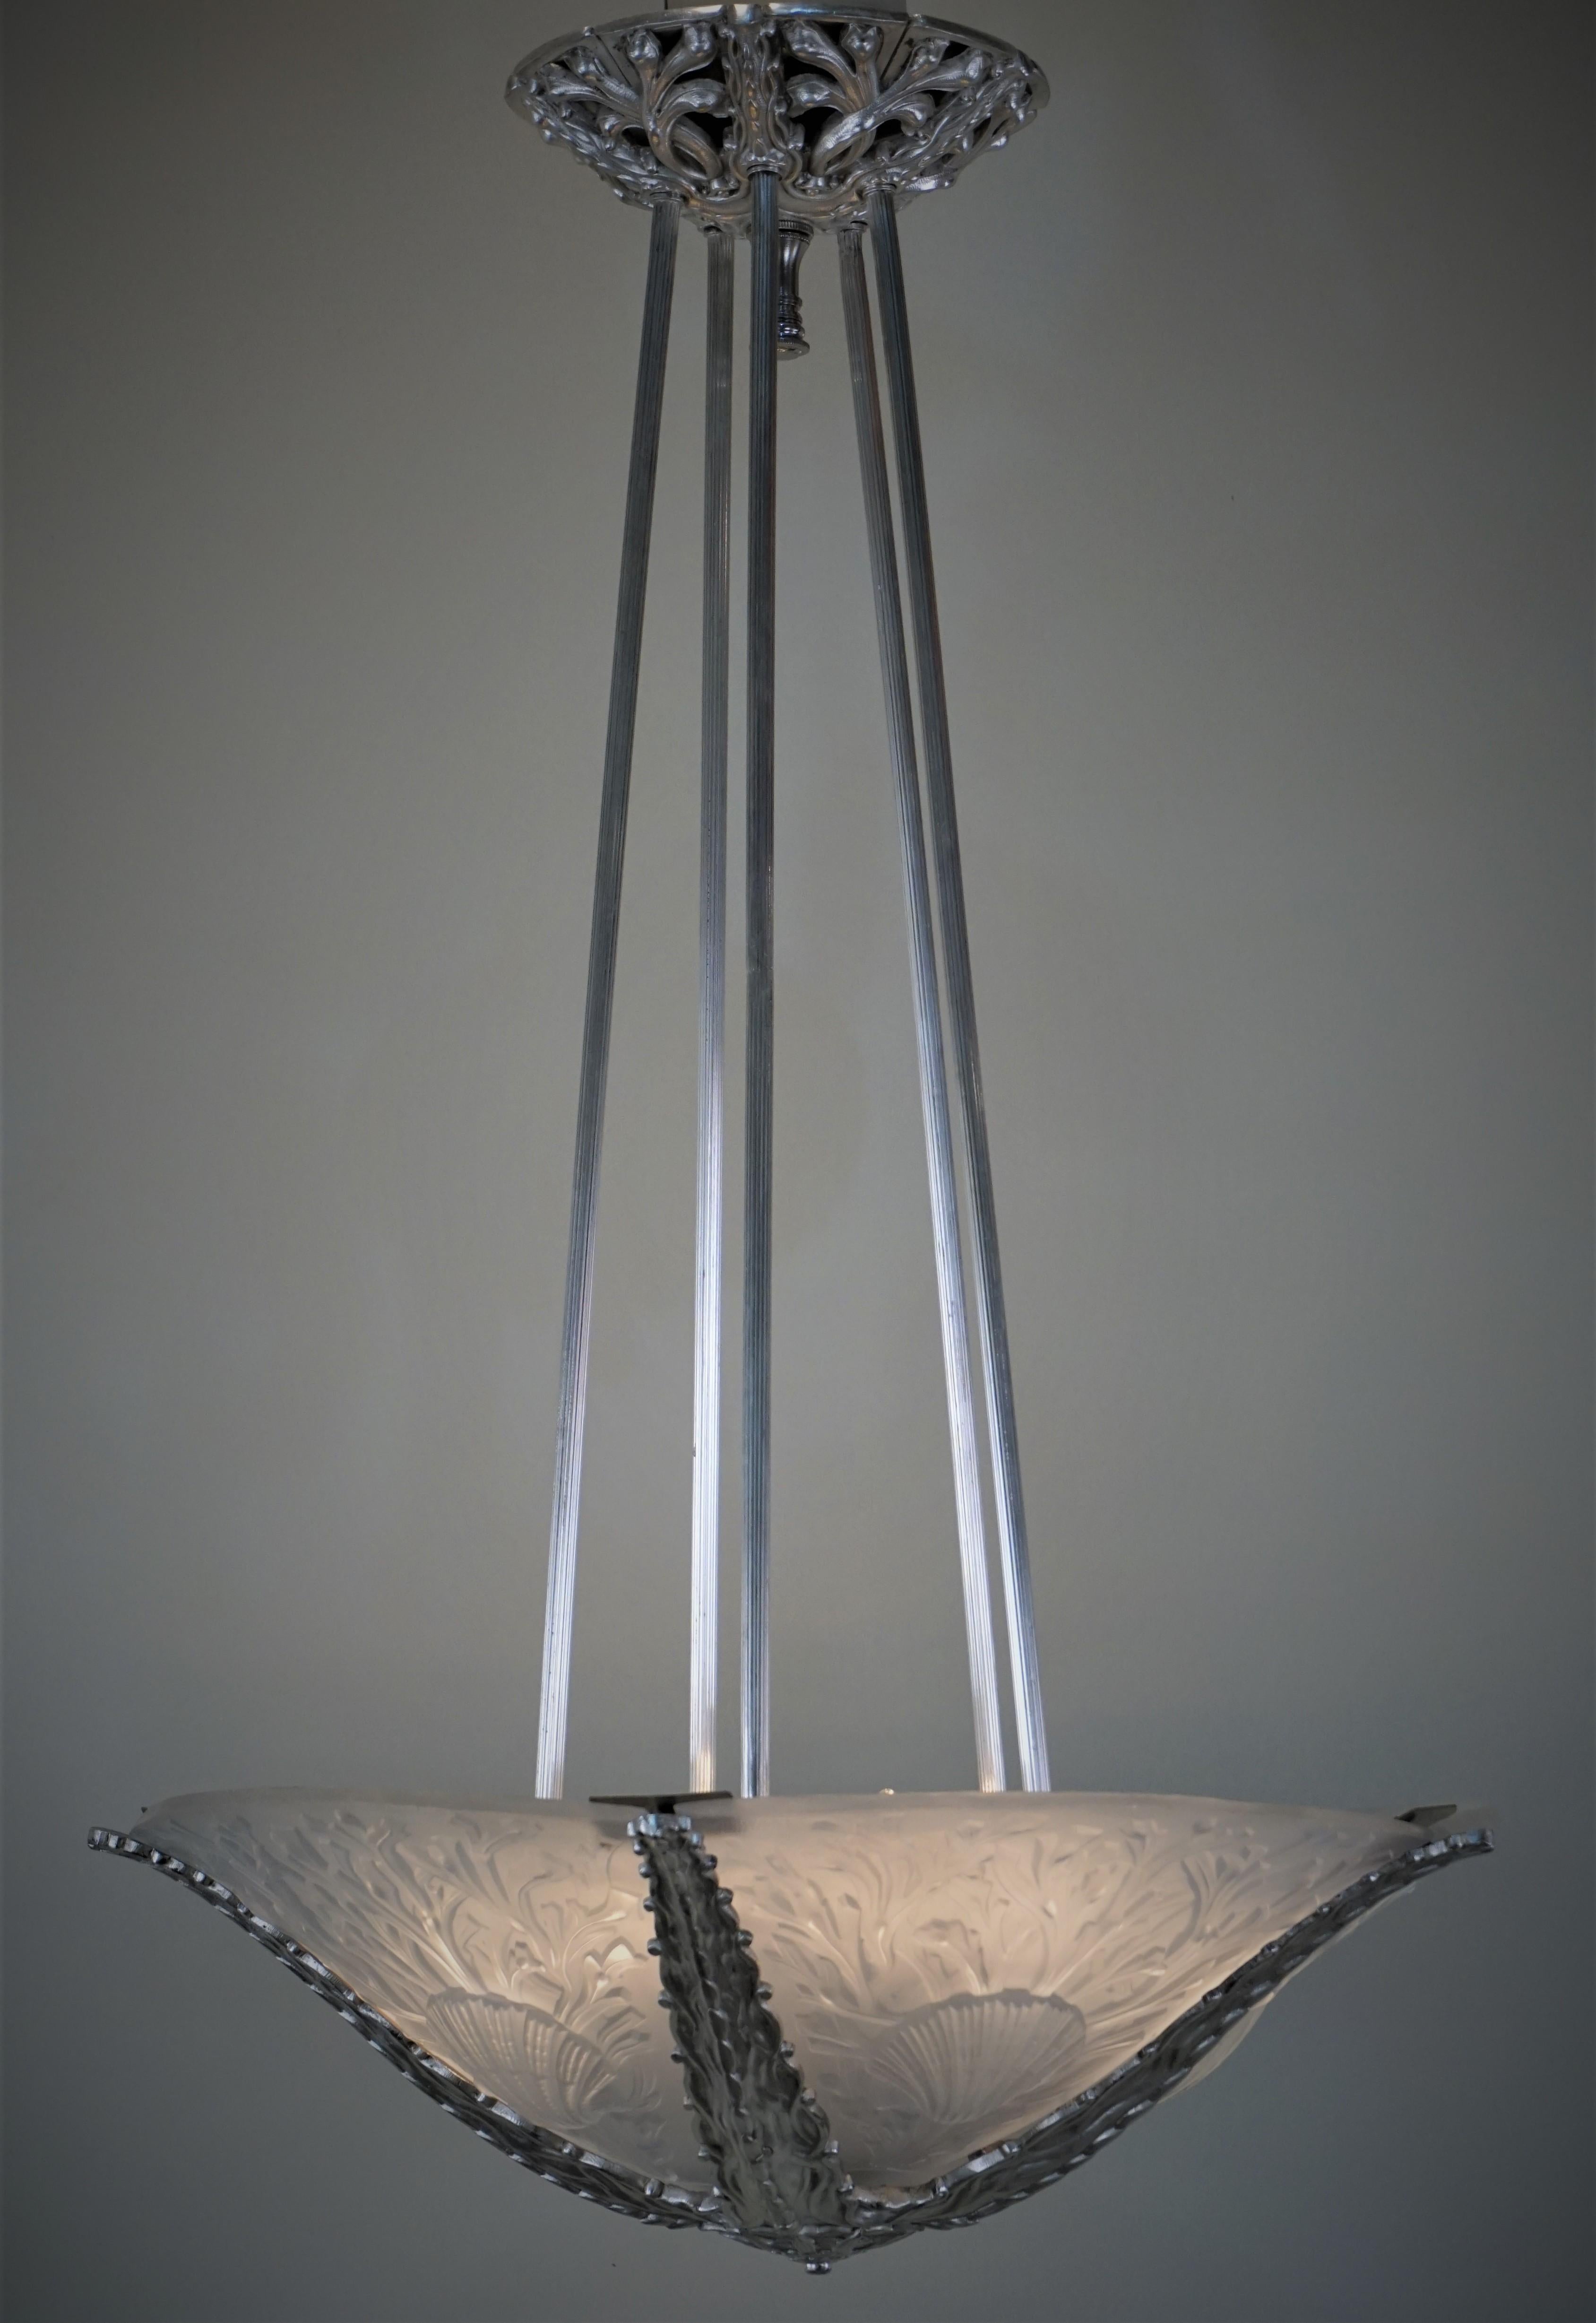 Glass Exquisite Art Deco Chandelier by Muller Freres